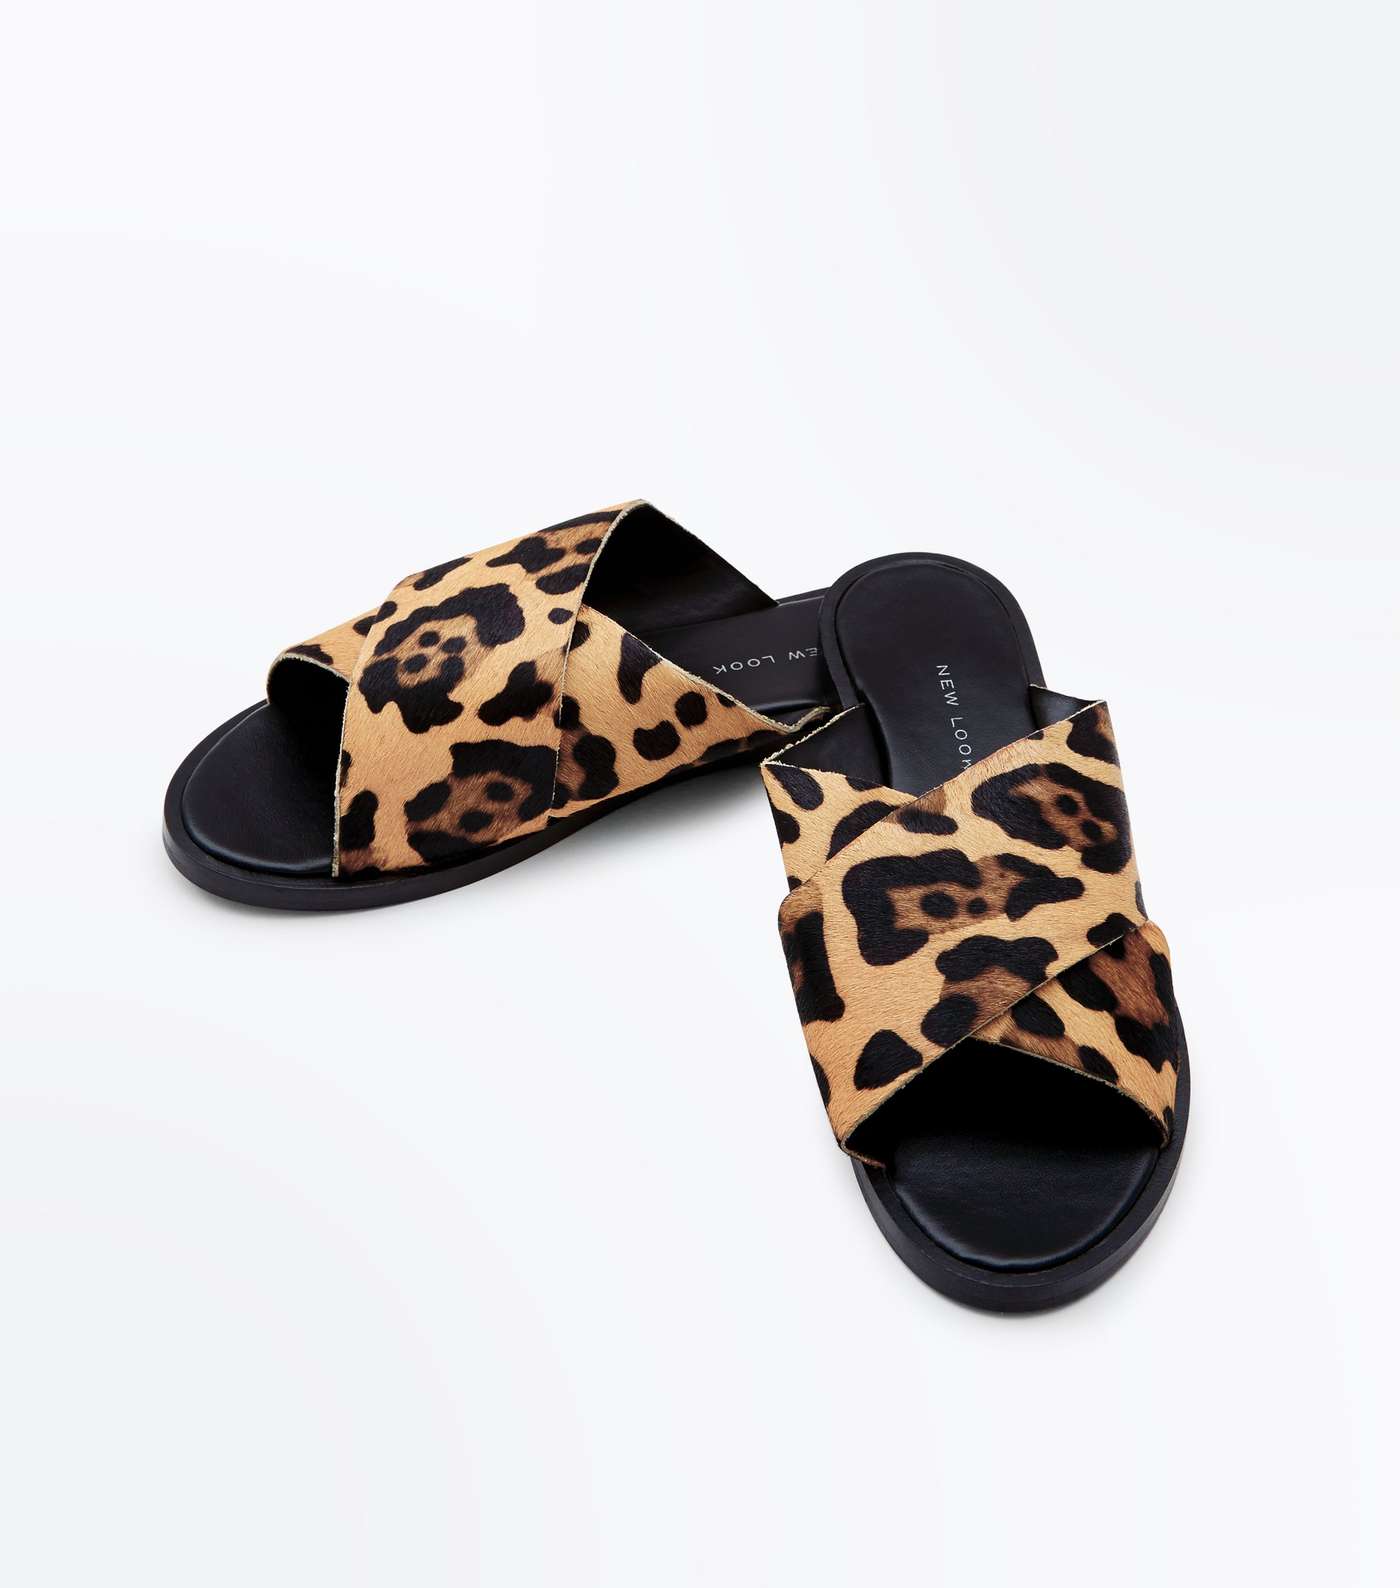 Wide Fit Stone Leather Leopard Print Sliders Image 3